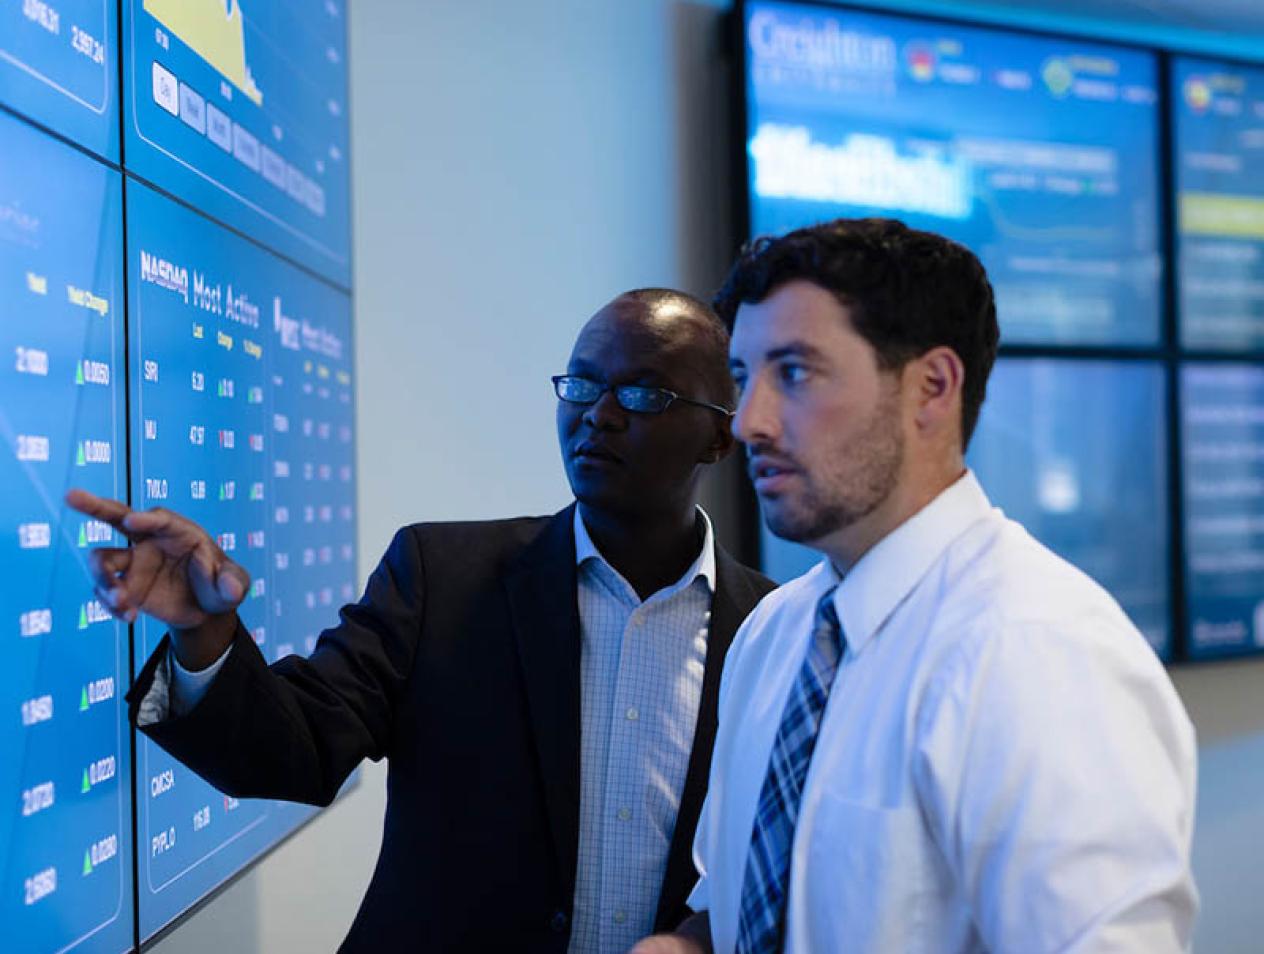 Two academics studying financial data on large classroom displays.